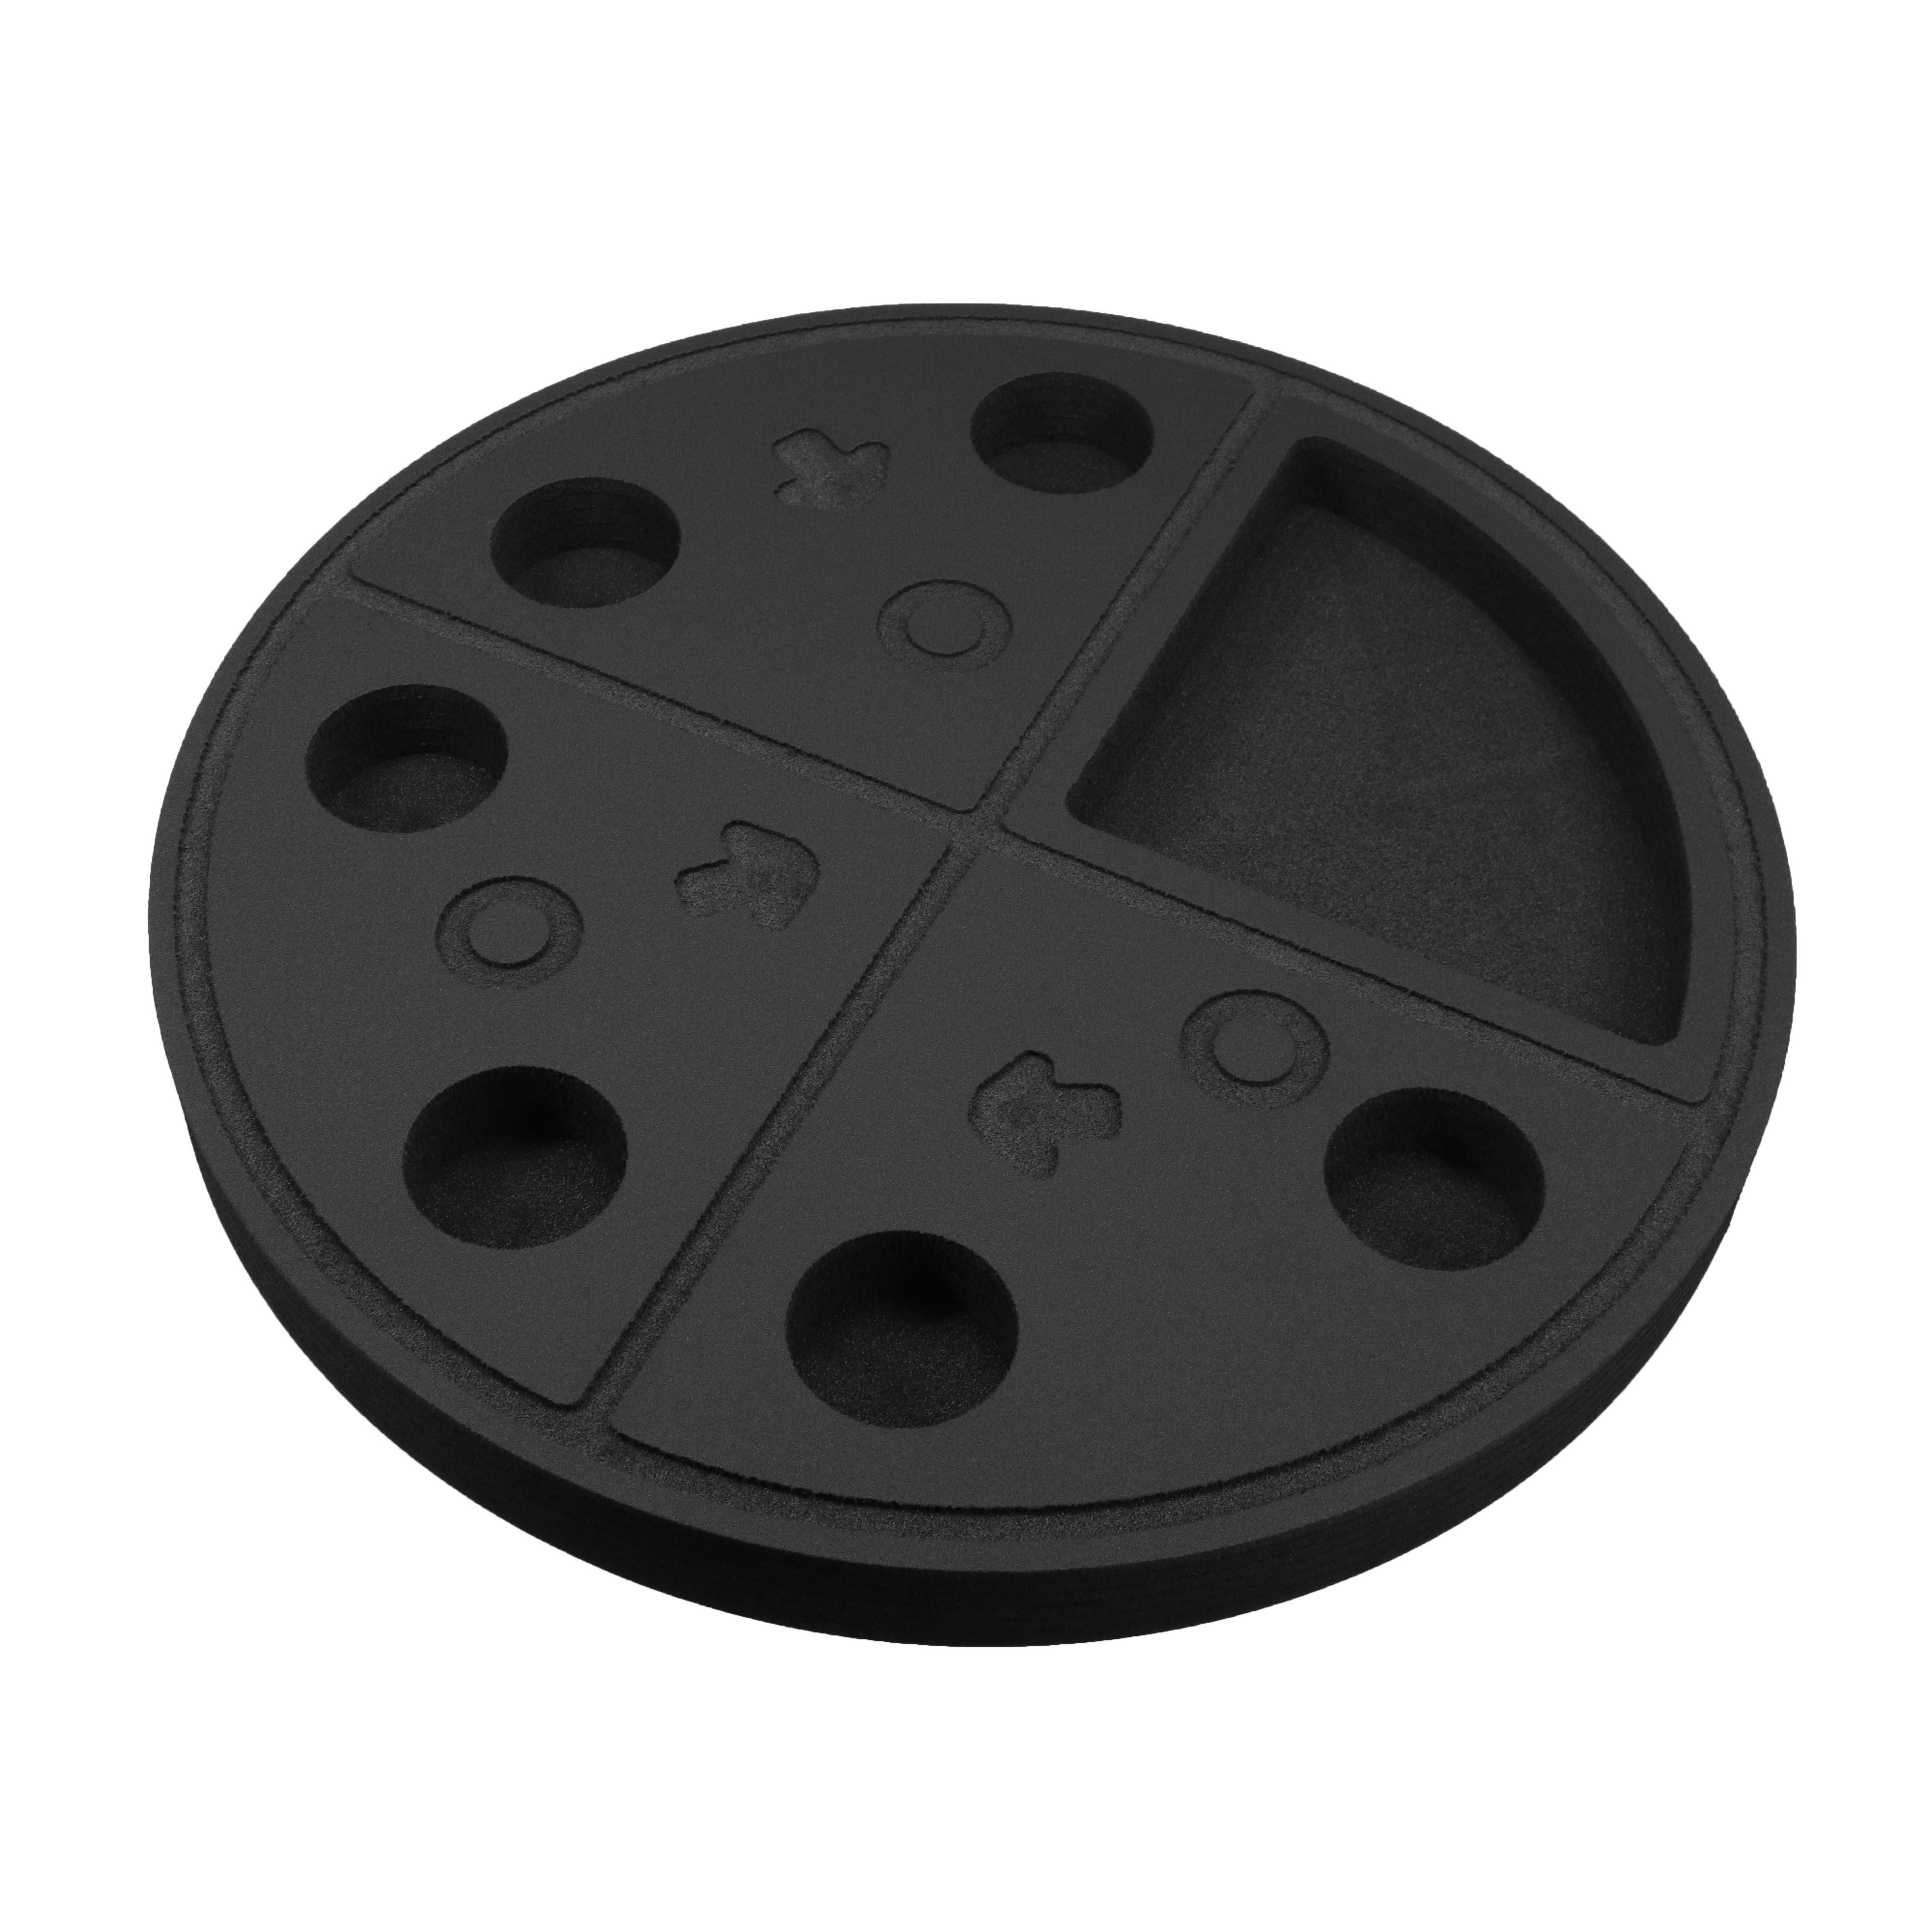 Floating Drink Cup Holder Pool Pizza Shape Black Foam 7 Compartment 2 Feet